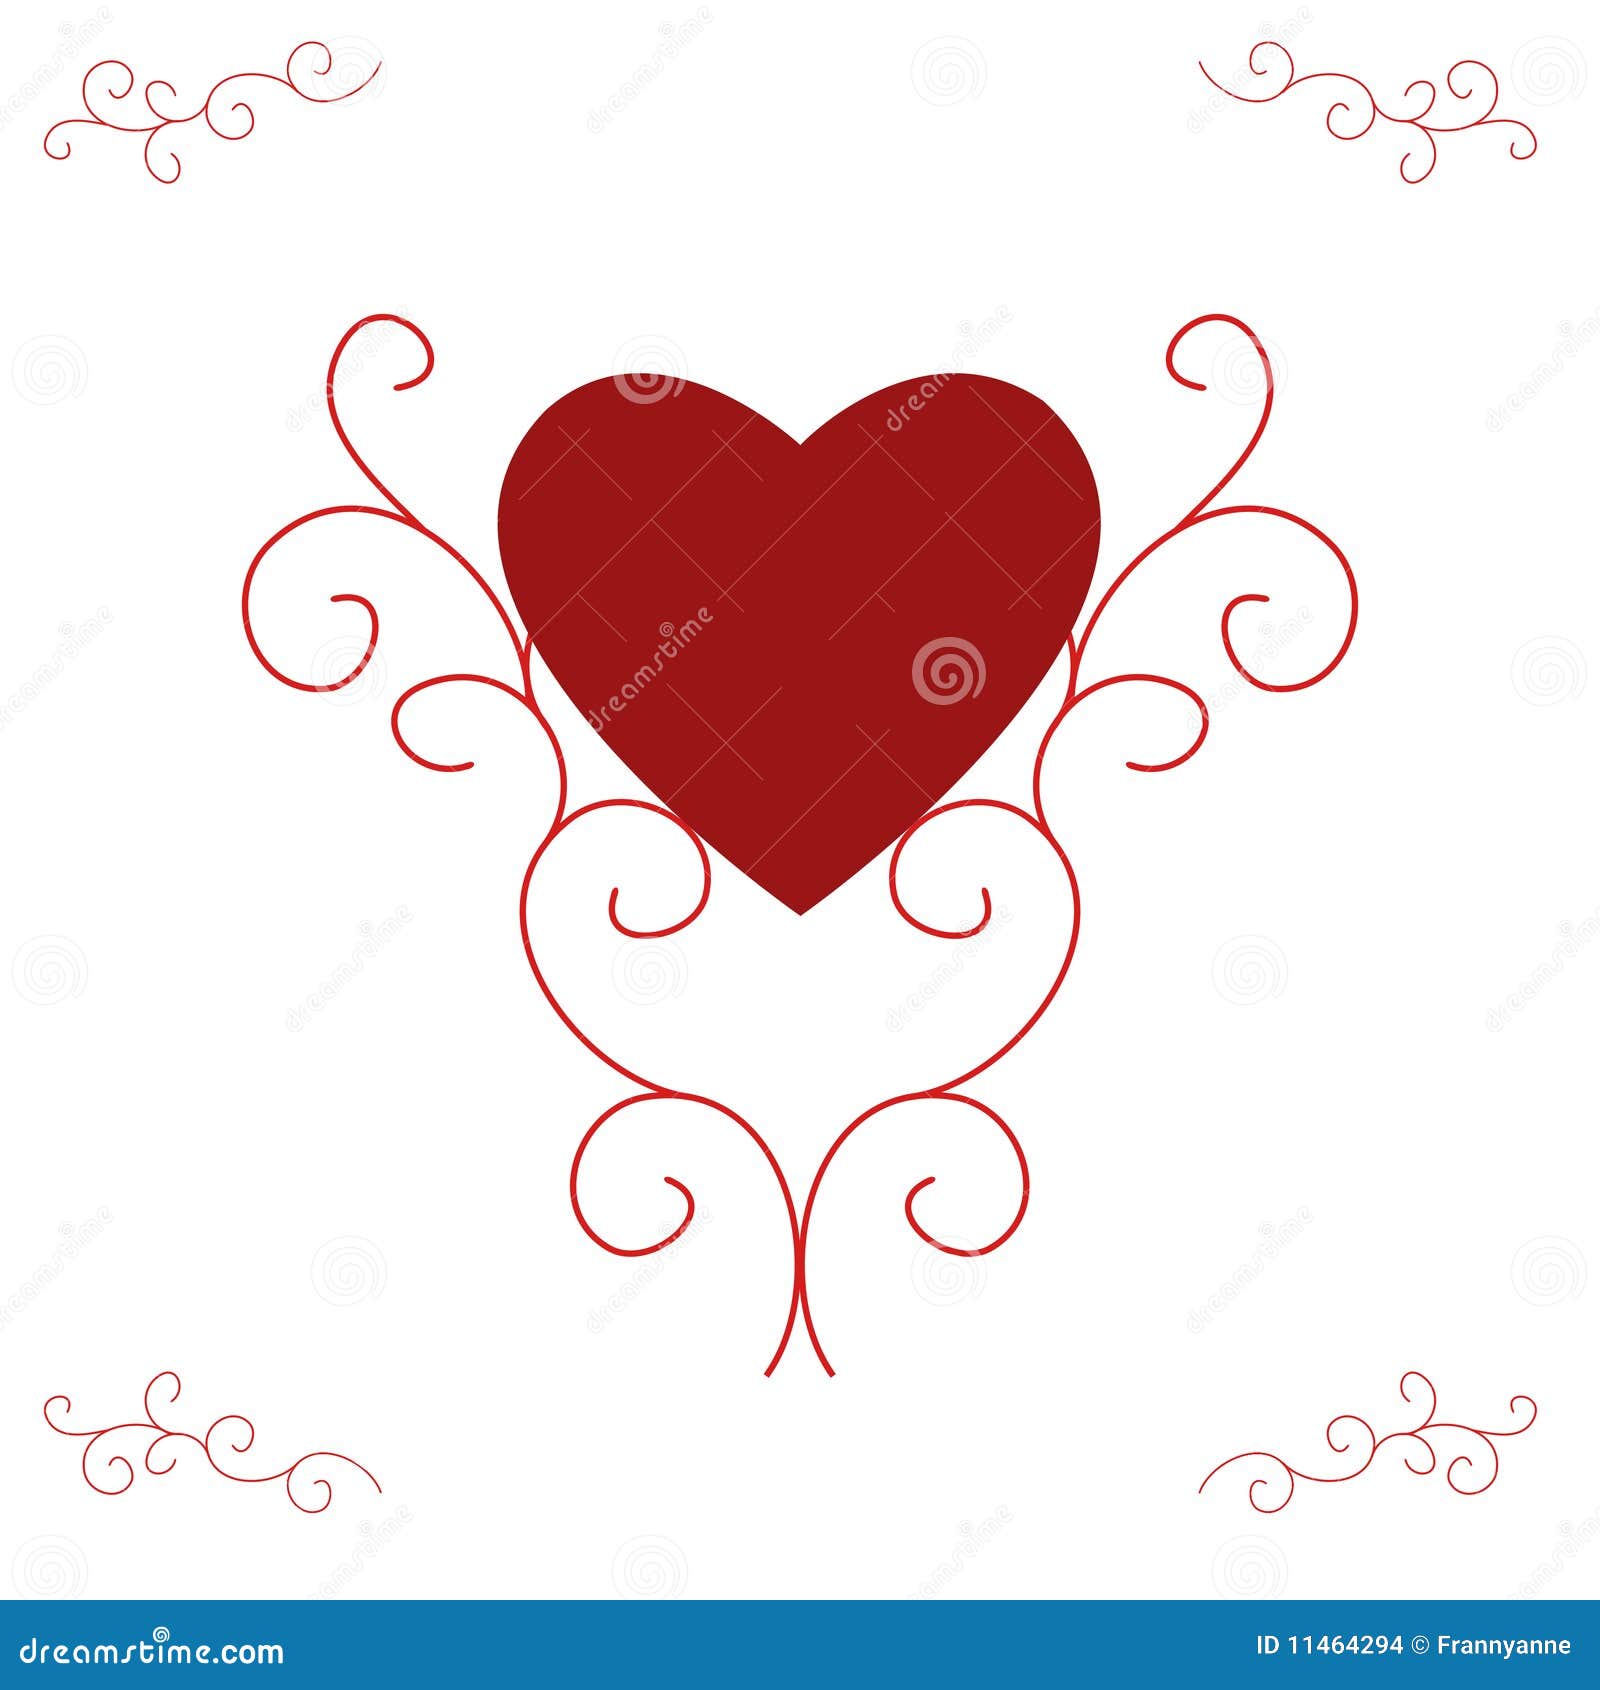 Valentine's Red Heart - Ornate Scrolls Stock Images - Image: 11464294